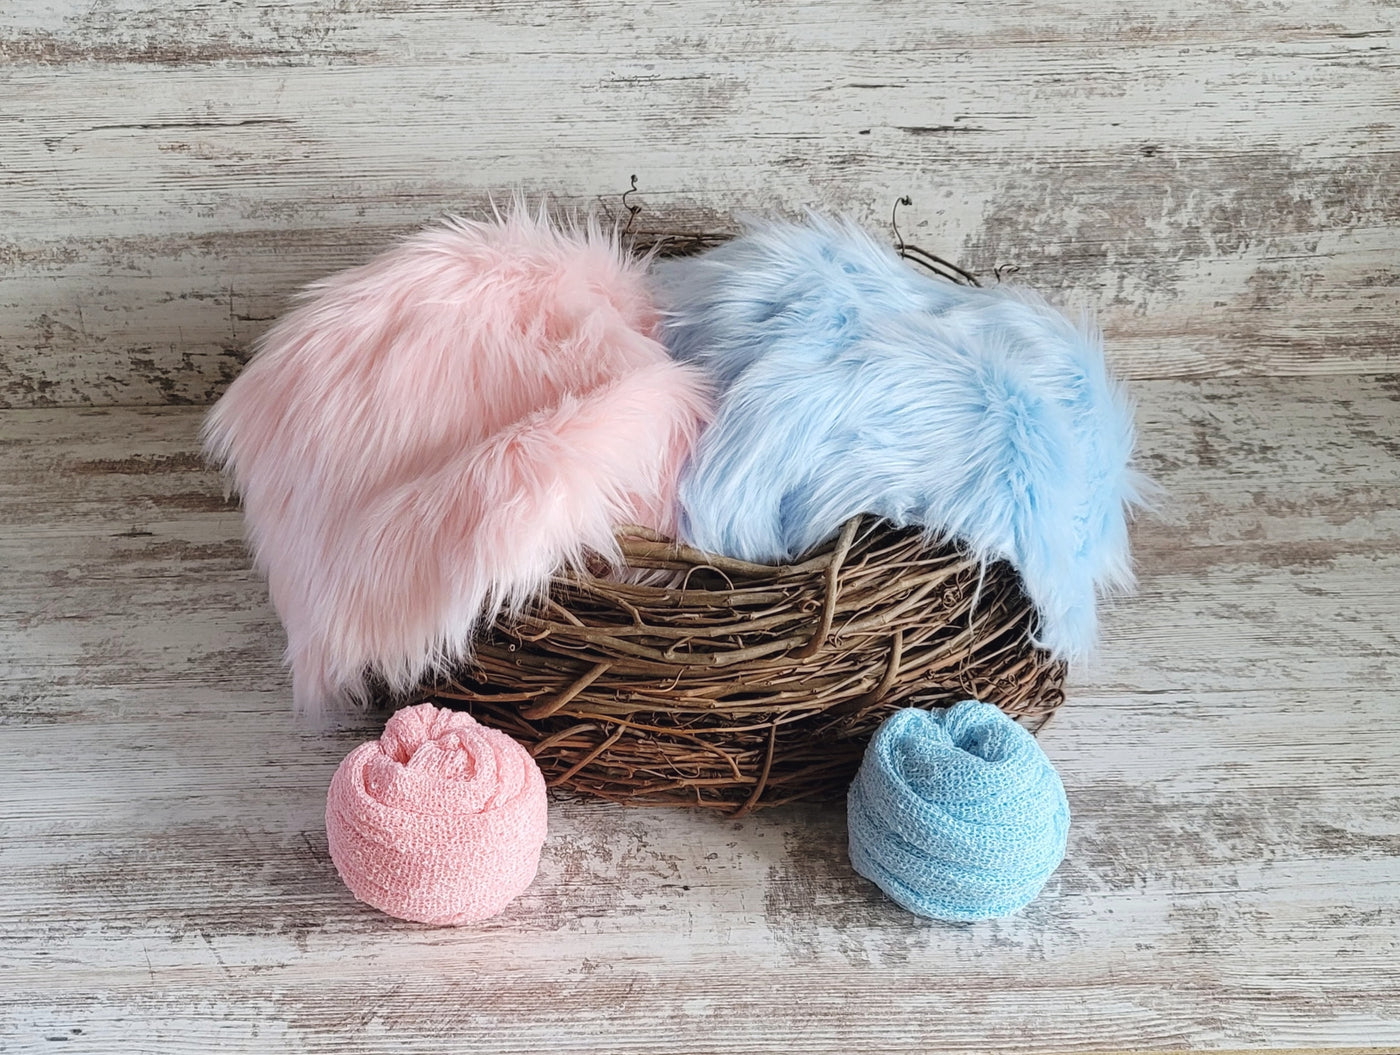 SET Wood Nest, Soft Pink and Baby Blue Furs, Baby Wraps - Beautiful Photo Props